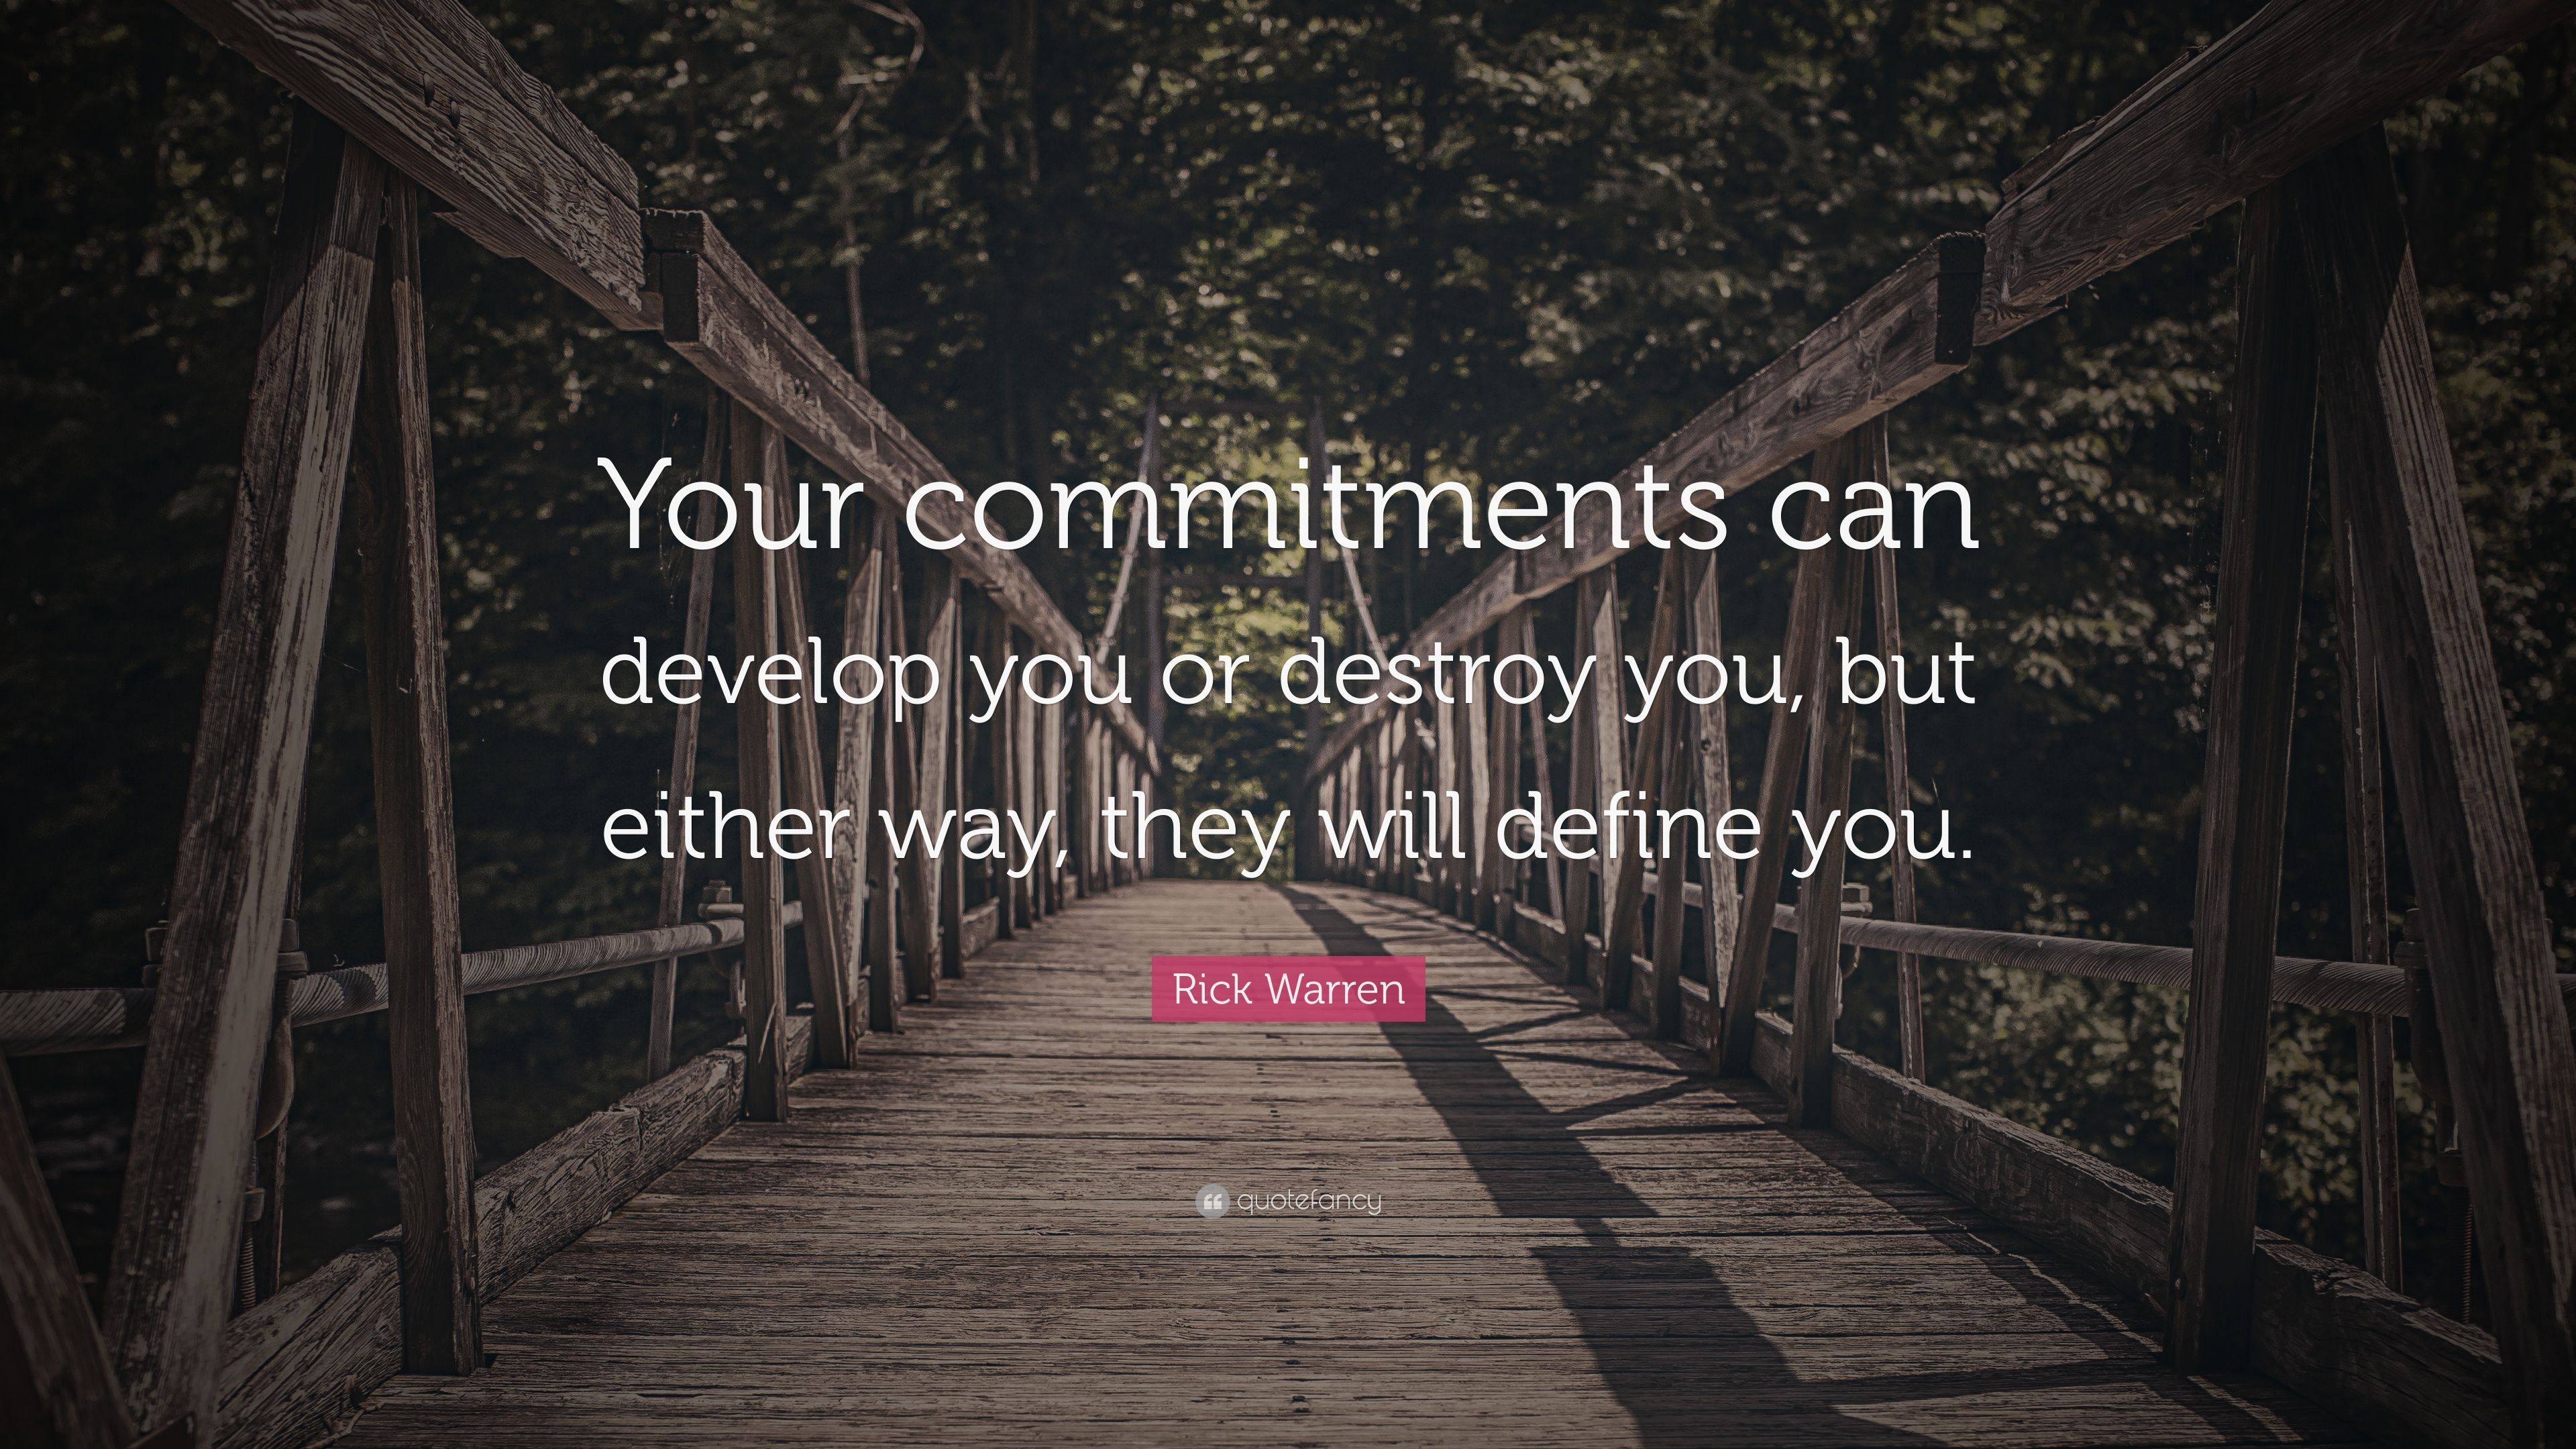 Rick Warren Quote: “Your commitments can develop you or destroy